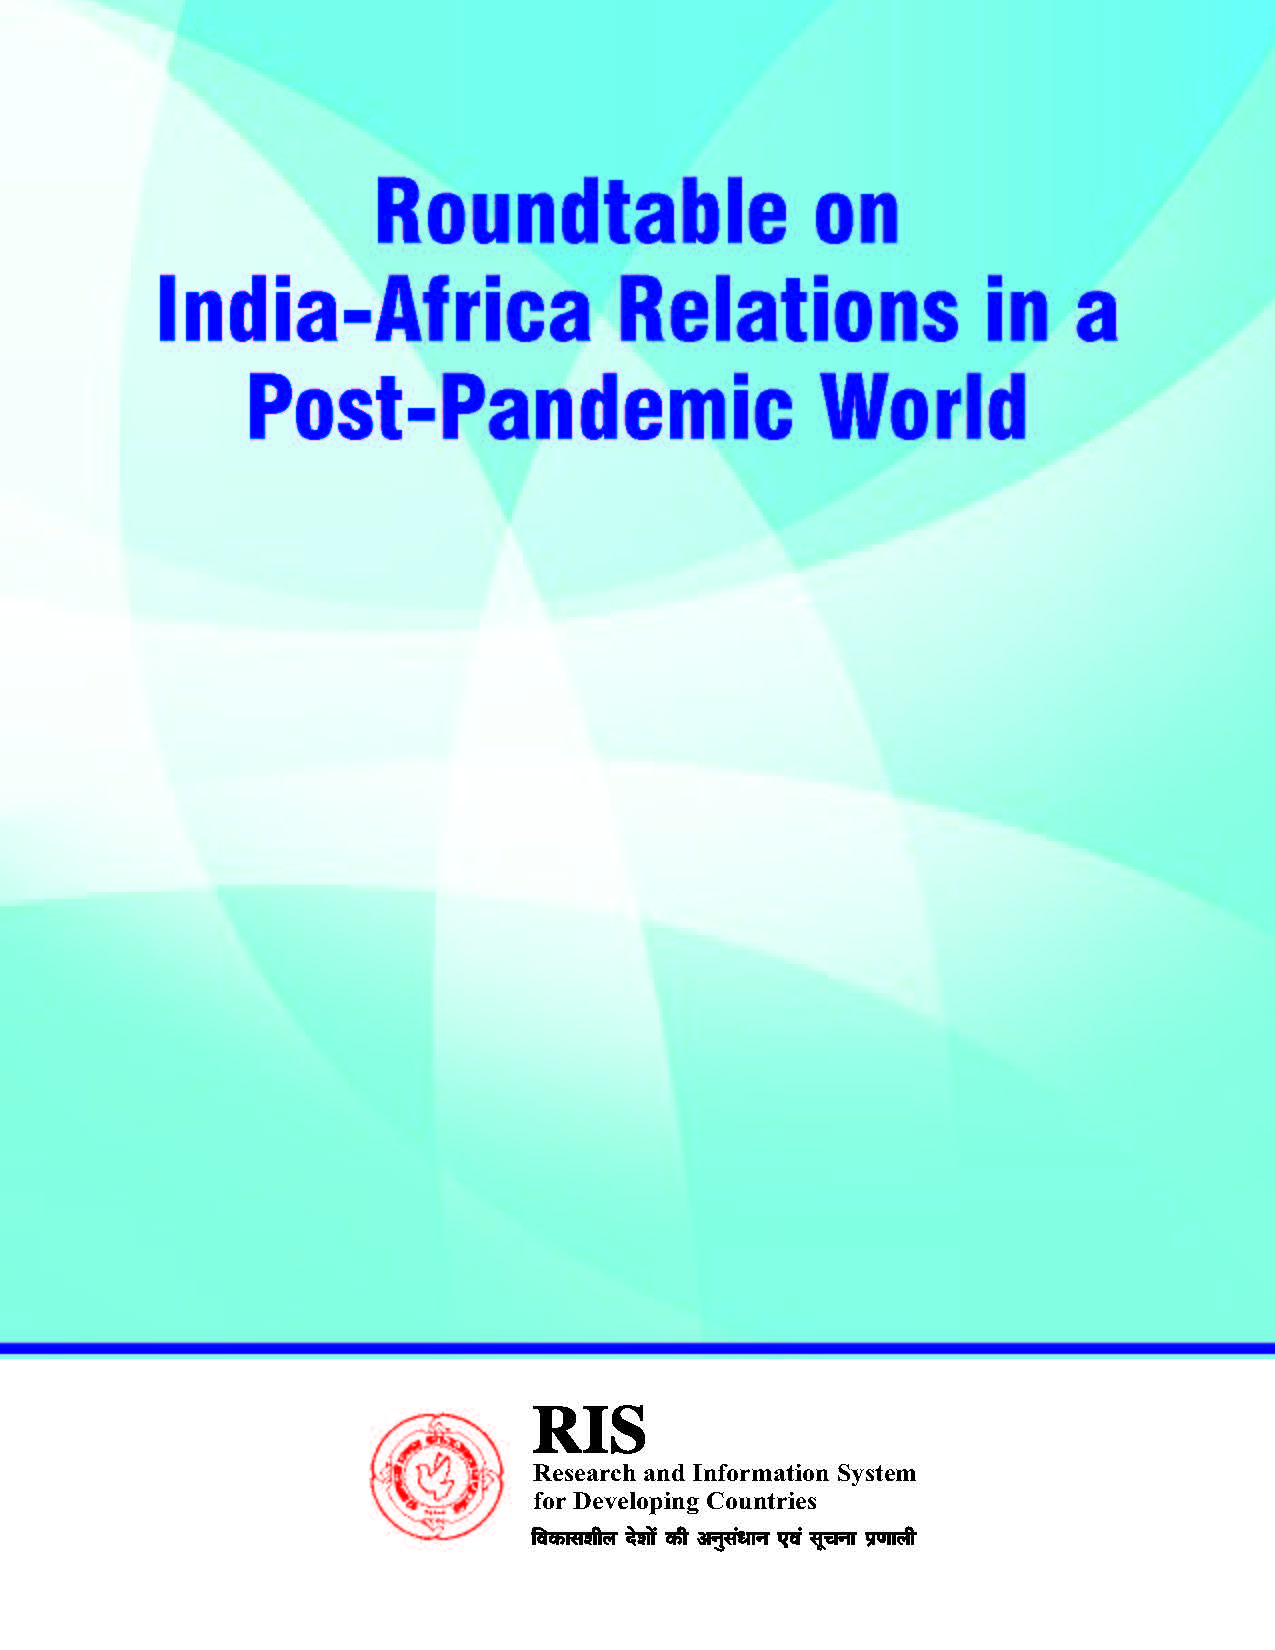 Roundtable on India-Africa Relations in a Post-Pandemic World